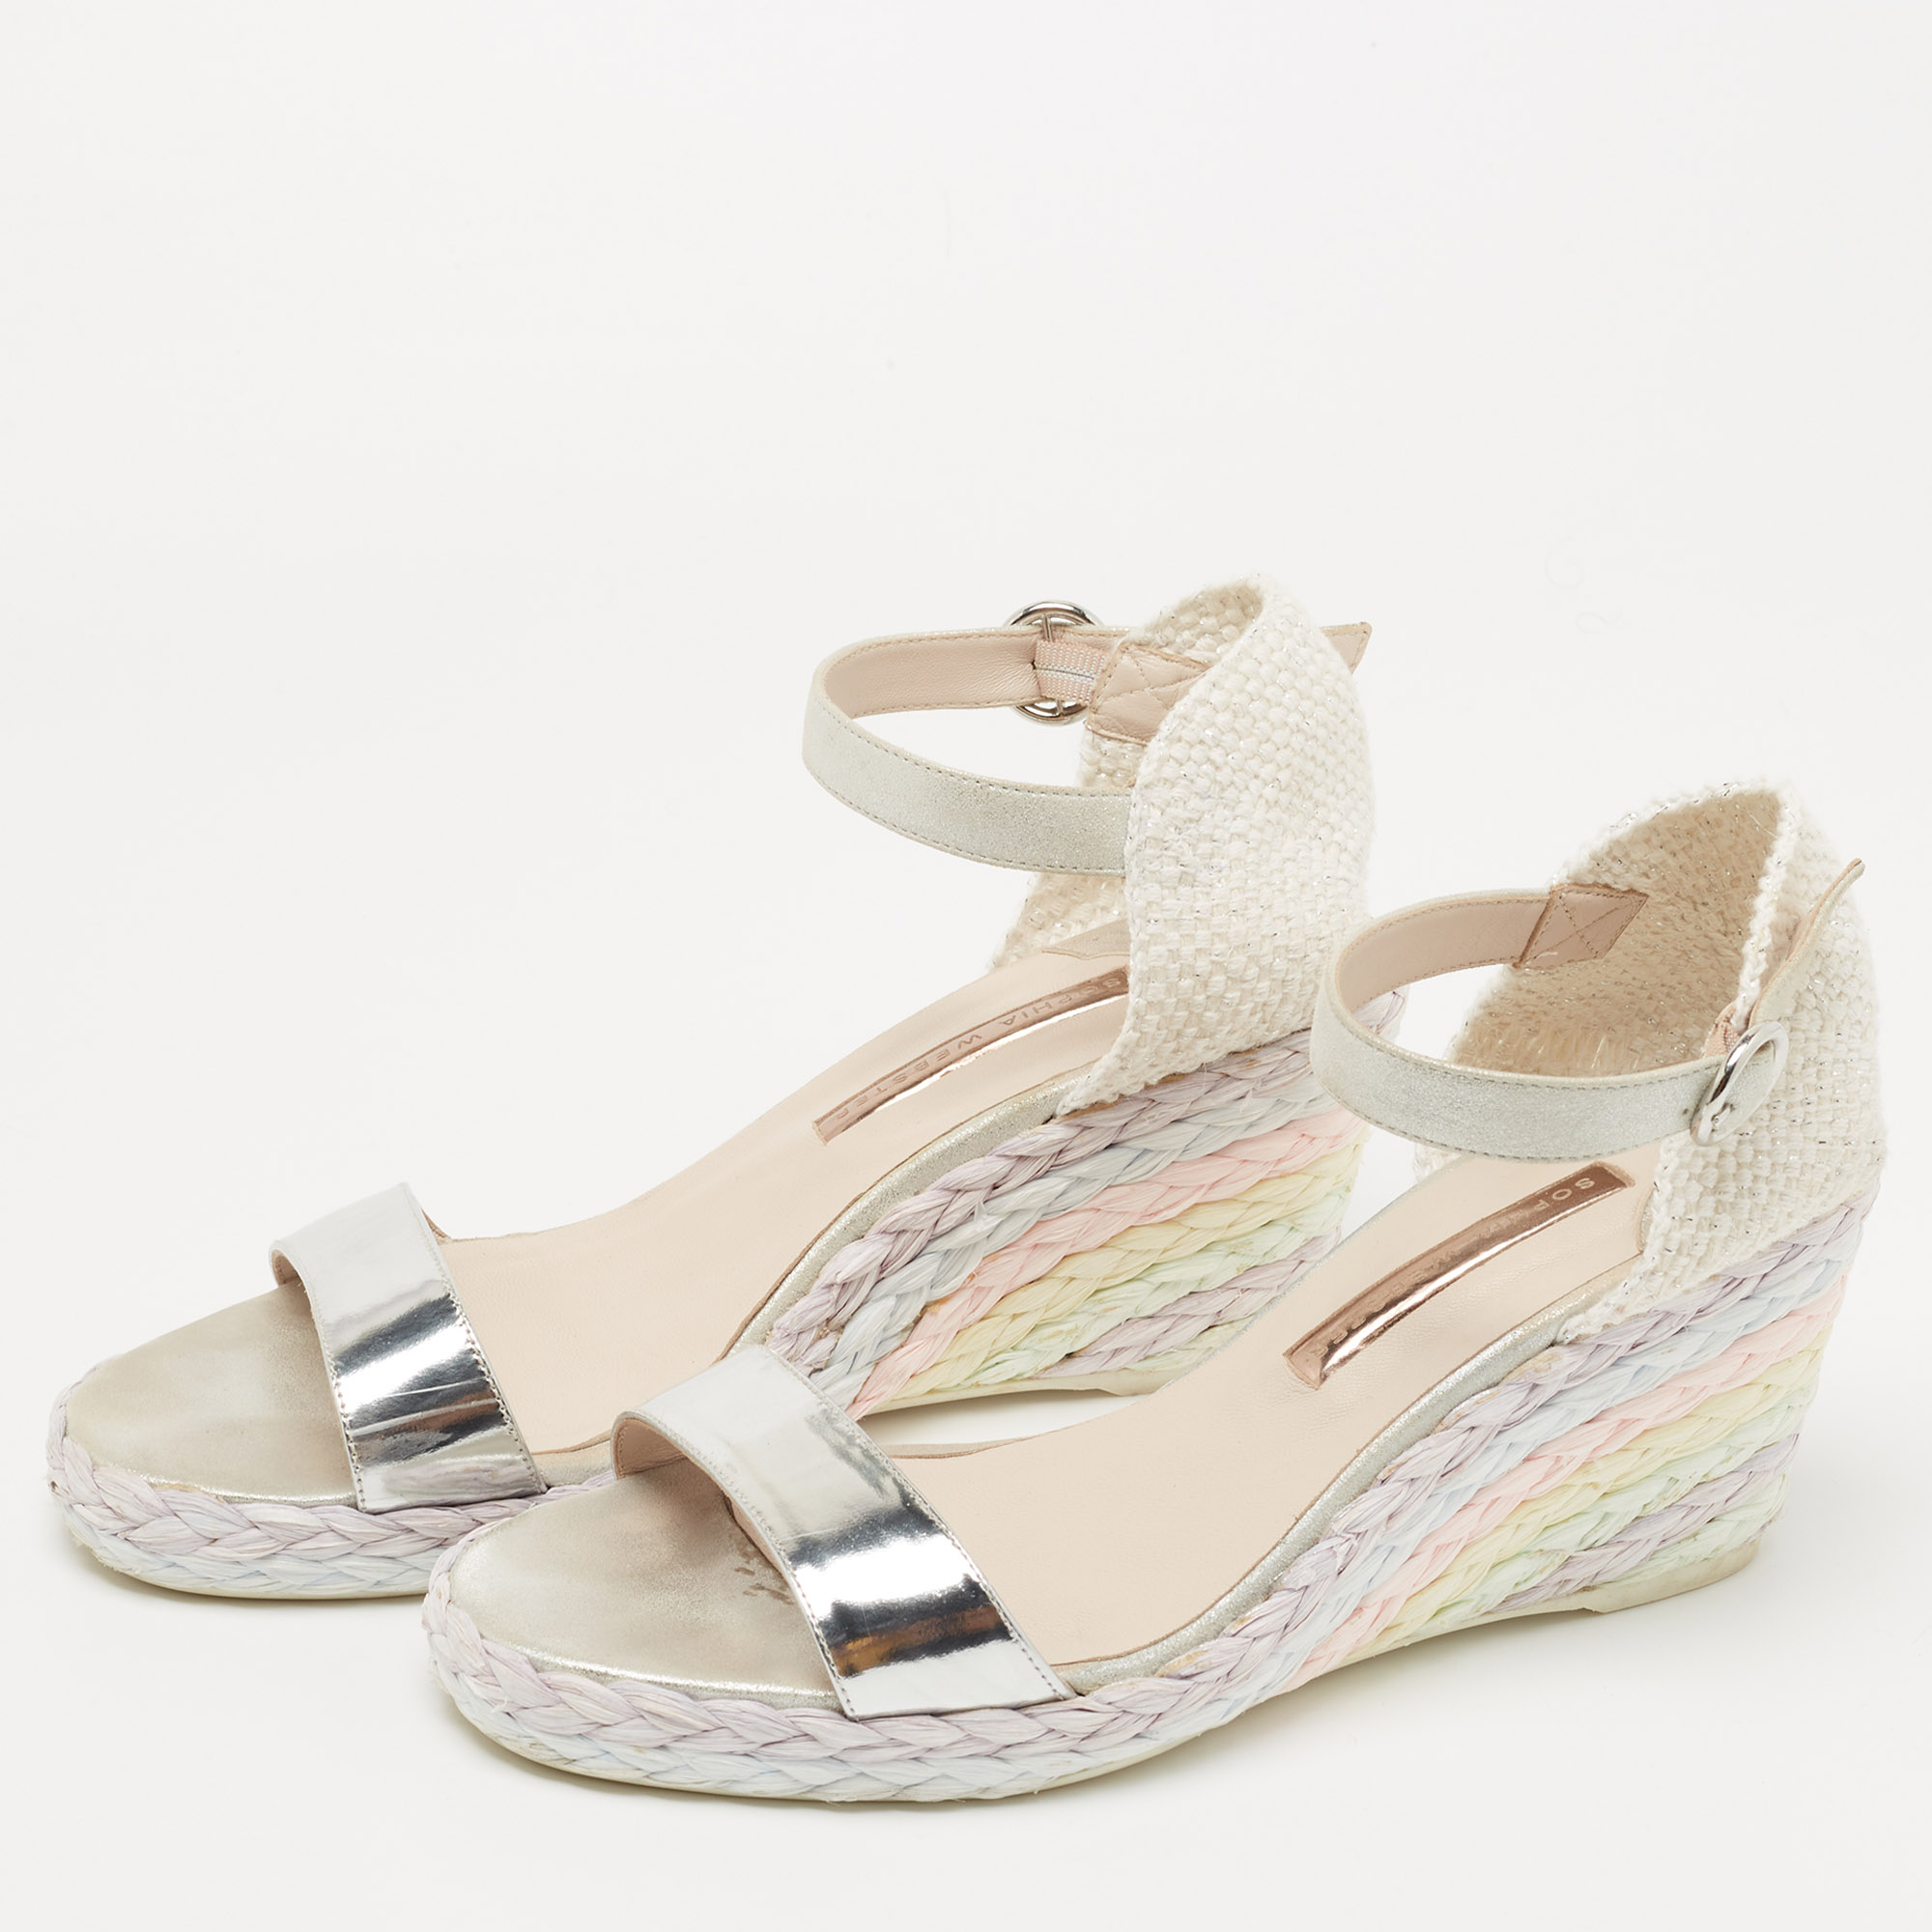 

Sophia Webster Multicolor Leather and Woven Fabric Lucita Espadrille Wedge Sandals Size